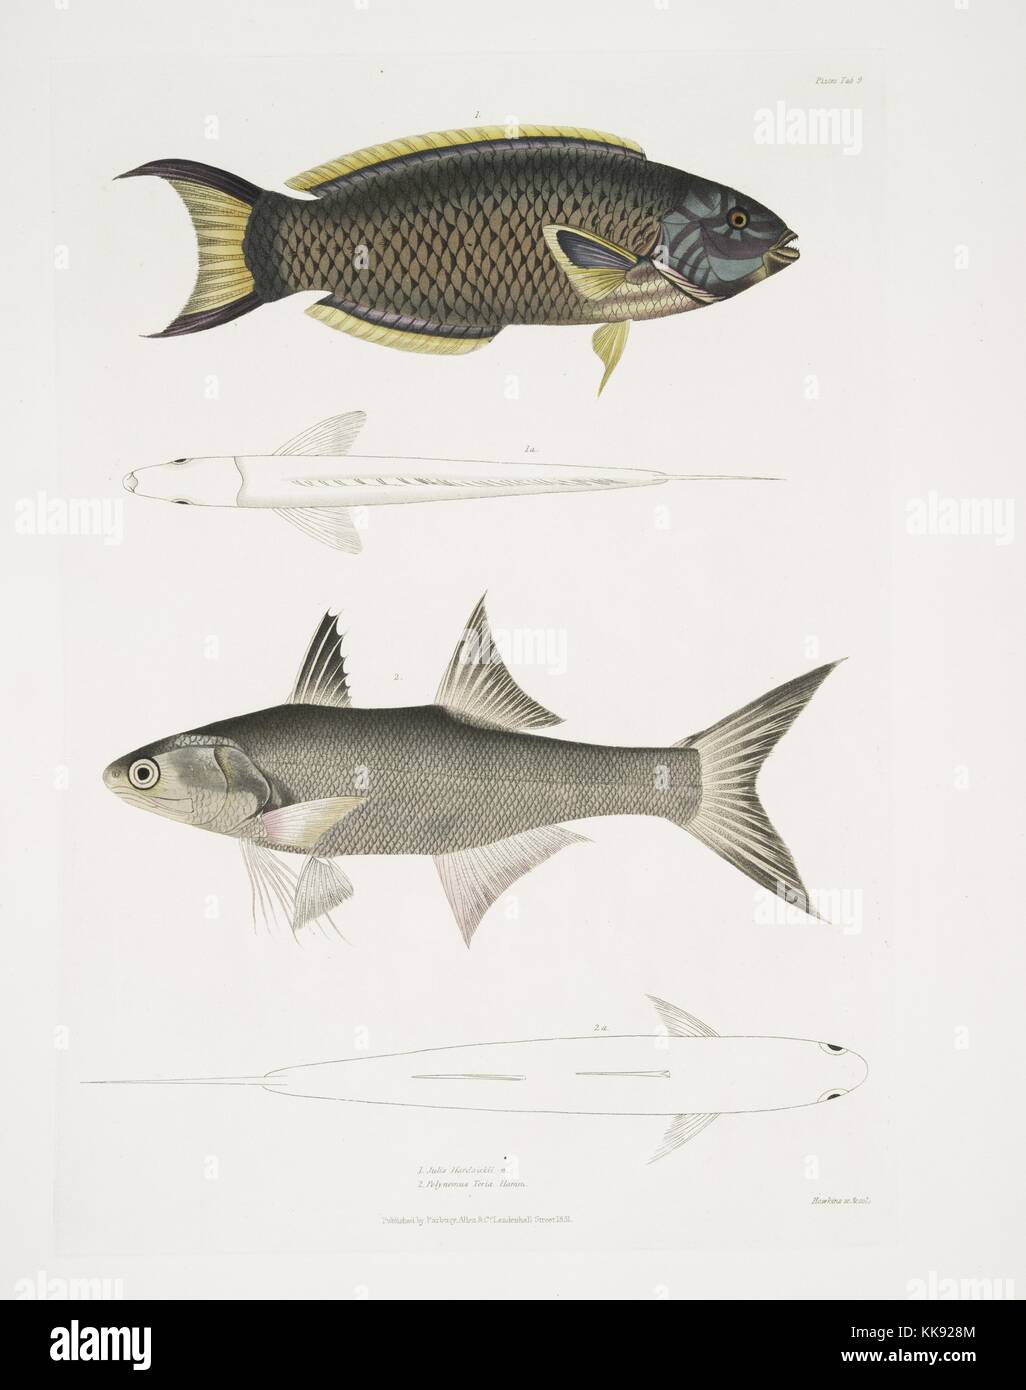 Four illustrations of fish, the first and third are colored images that provide a view of the fish in profile to provide readers with a realistic depiction of the appearance of the fish, the other two images are line drawings of the same fish presented from a top down view to provide insight on the anatomy, the images come from the book Illustrations of Indian Zoology, the book was published by Major-General Thomas Hardwicke in collaboration with John Edward Gray, Harwicke had commissioned local artists in India to paint over 4500 animal specimens during his military service there, many animal Stock Photo